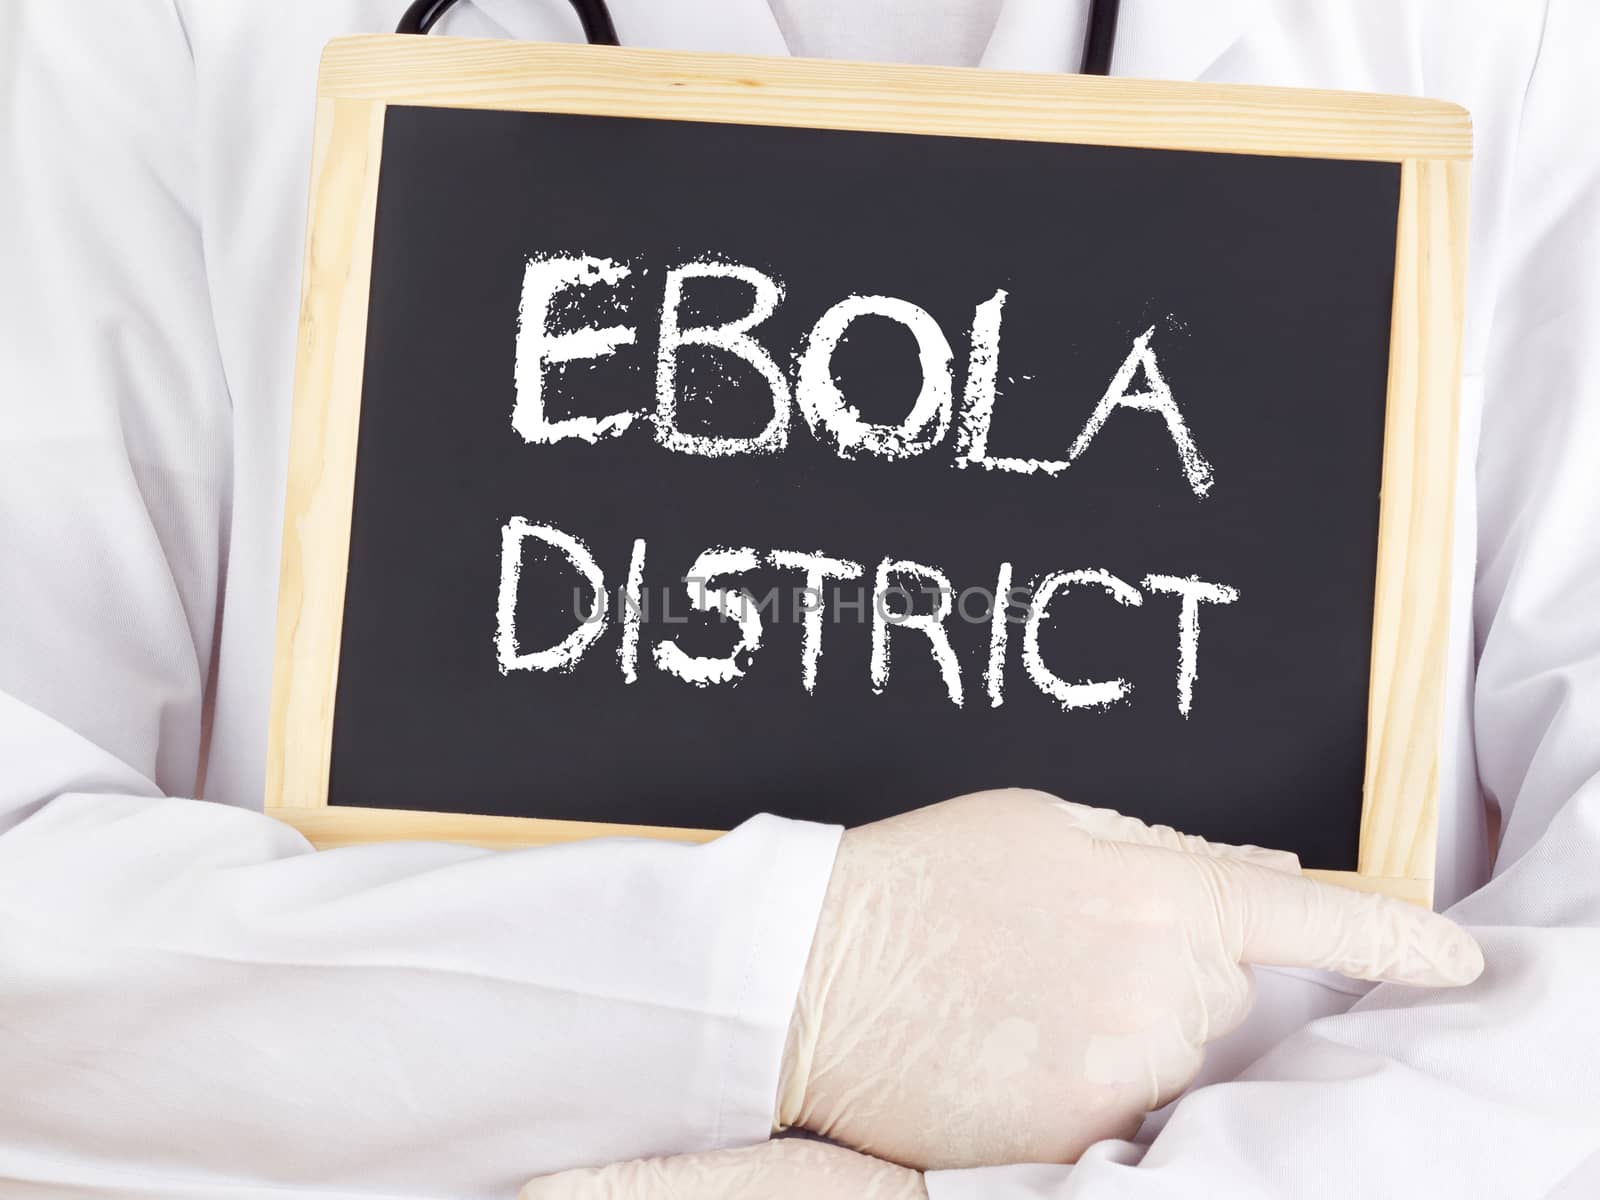 Doctor shows information: Ebola district by gwolters